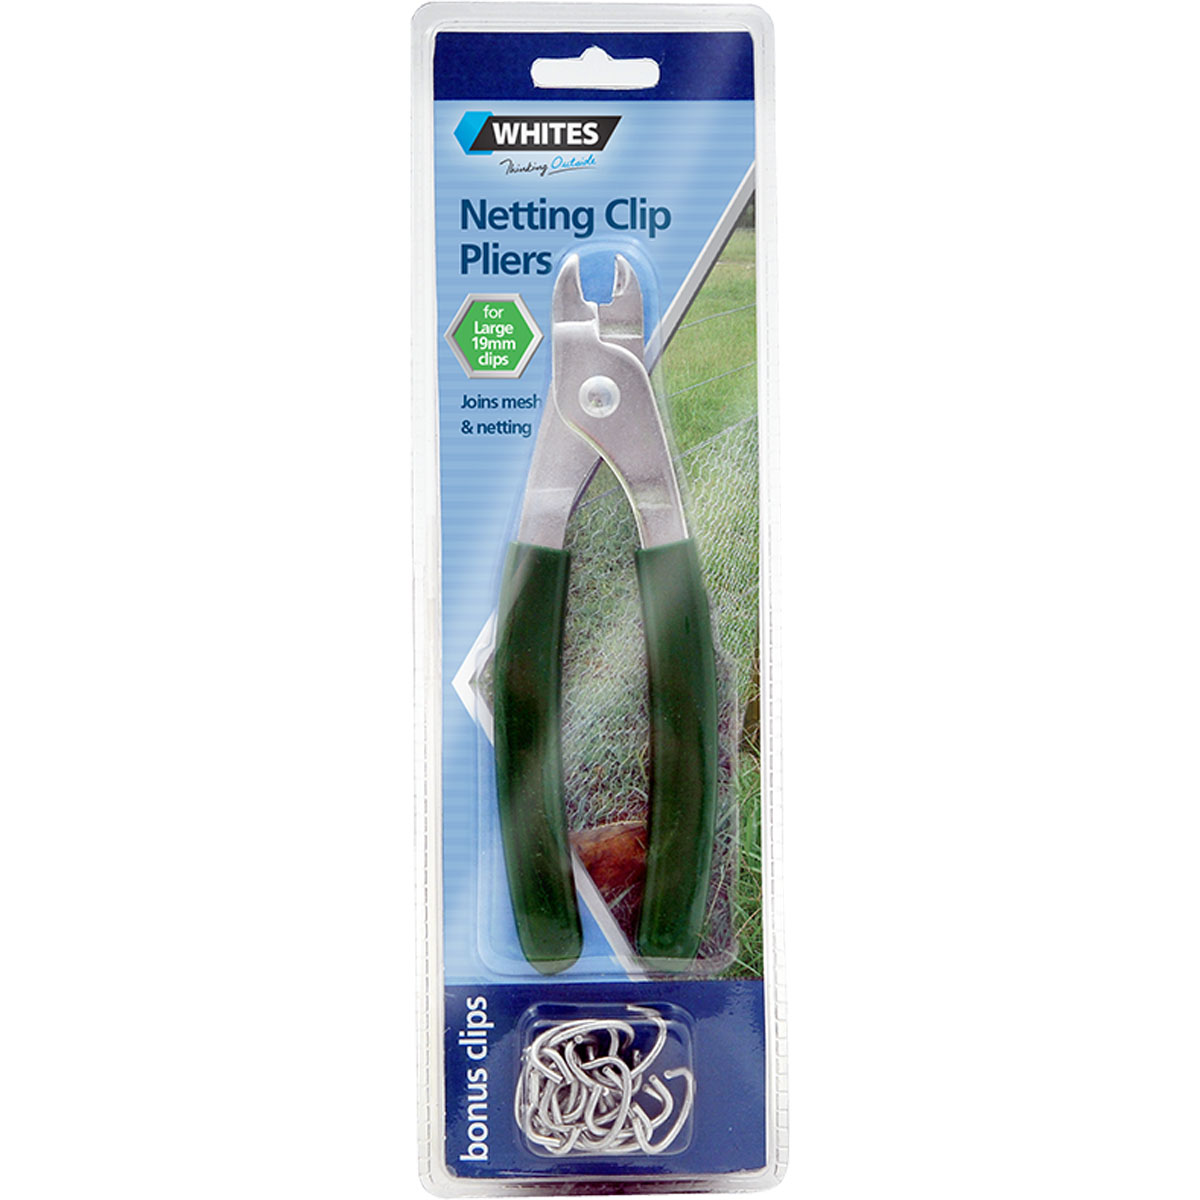 12406 netting clip pliers green handle